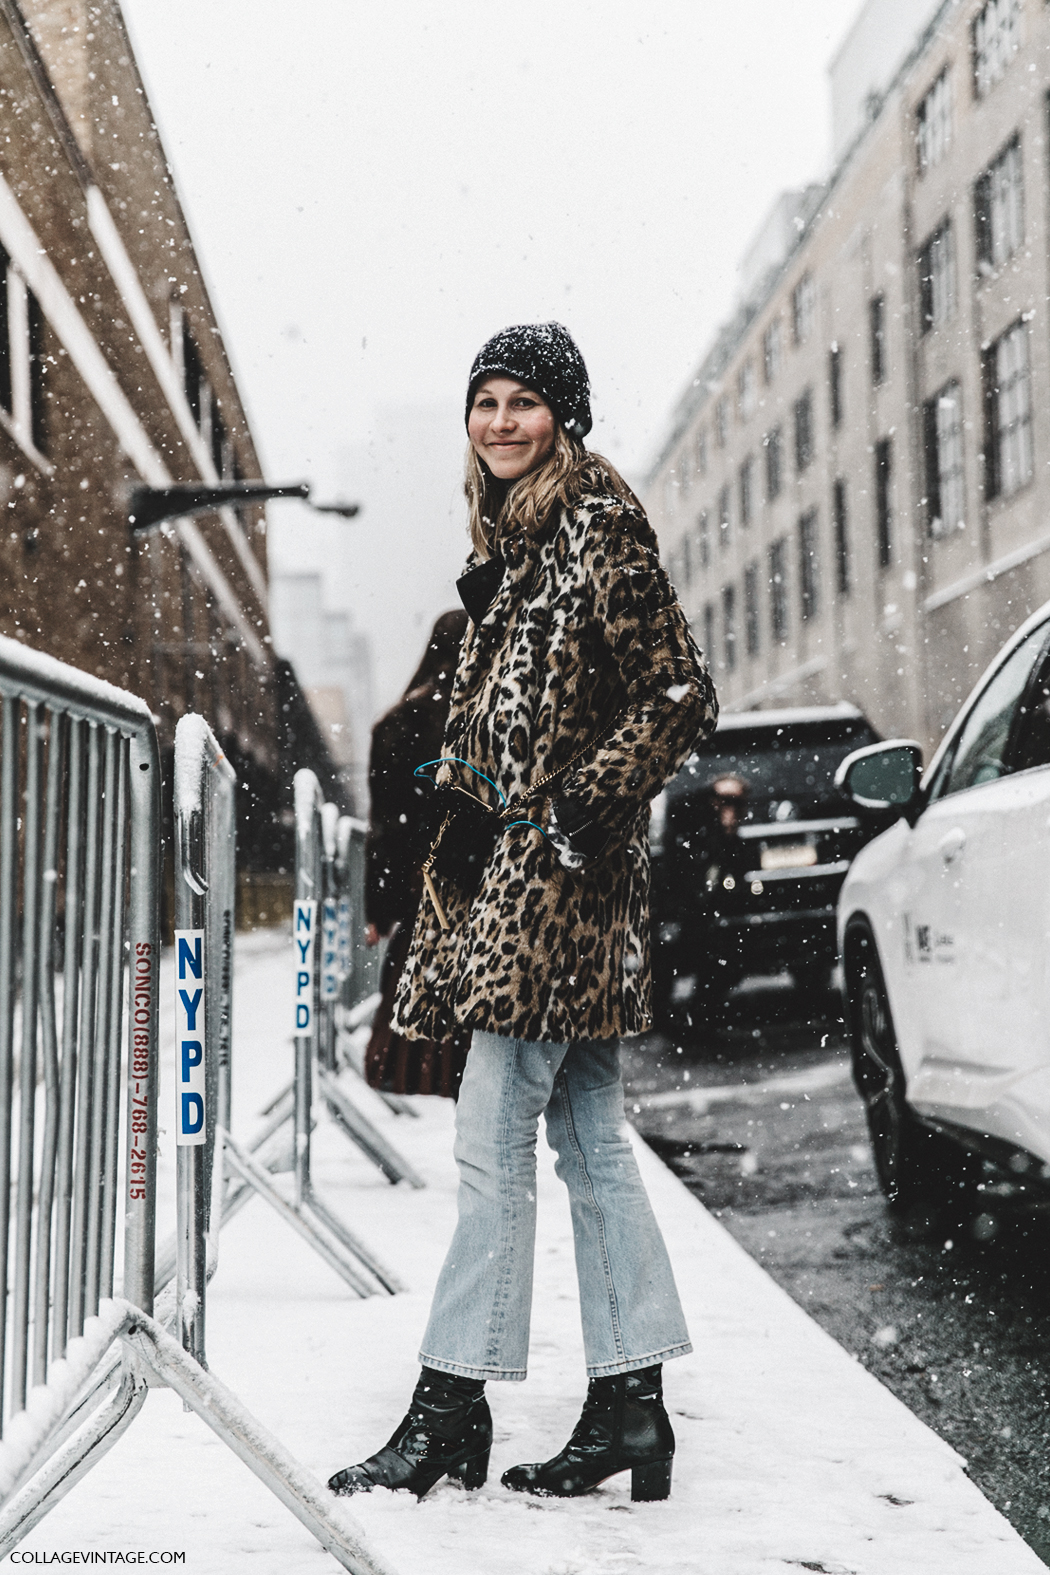 Step Up Your Snow Day Style With a Leopard-Print Coat